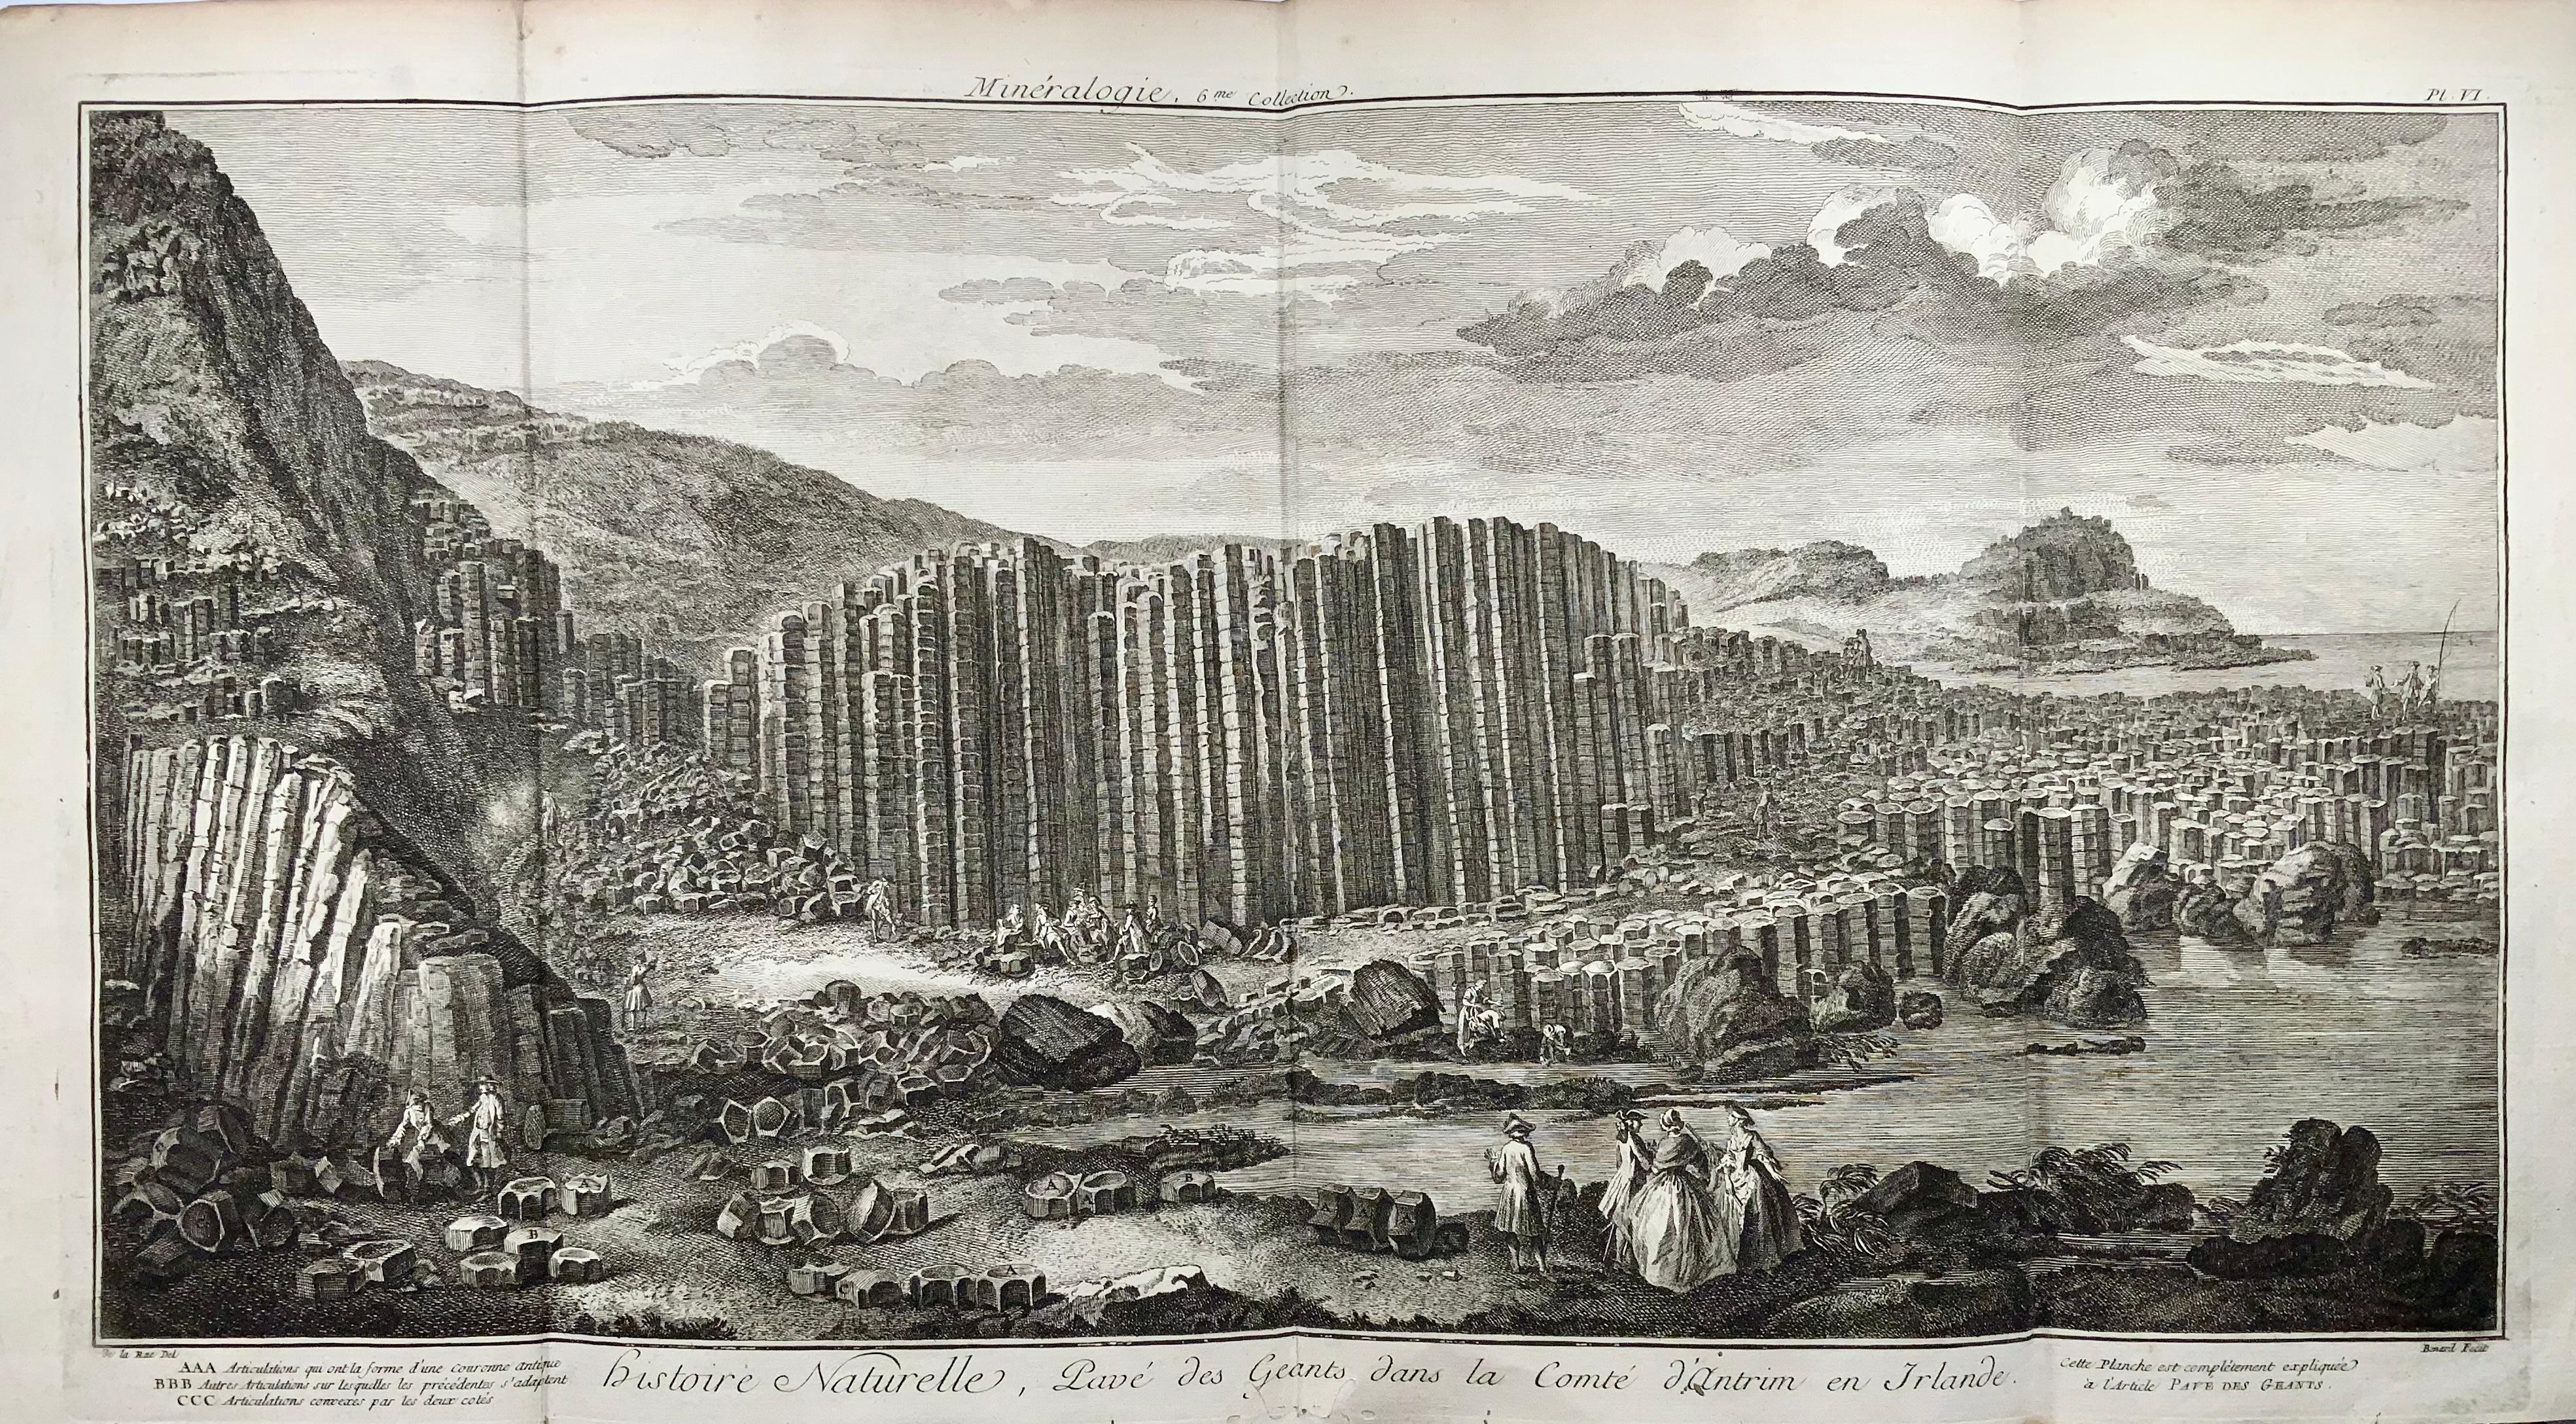 Engraved by Benard after de la Rue.

Giant's Causeway. 1. Giant's Causeway in County Antrim in Ireland. AAA. Articulations in the shape of an old crown. BBB. Other articulations on which contiguous ones fit. CCC. Articulations that are convex on